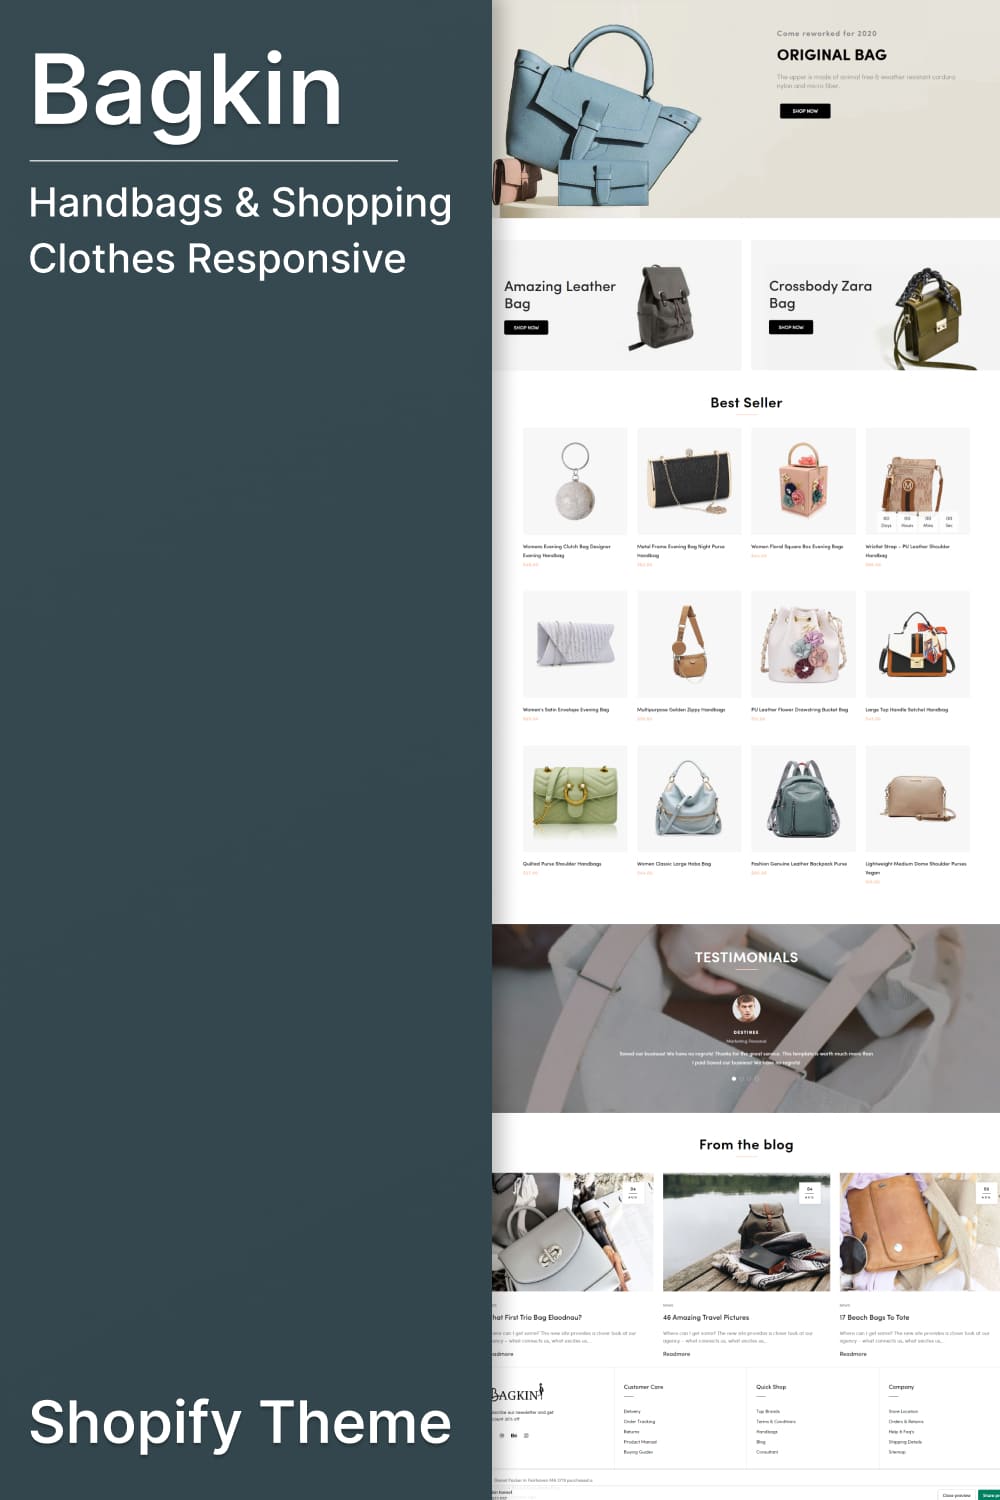 Best seller of Bagkin handbags shopping clothes responsive shopify theme.